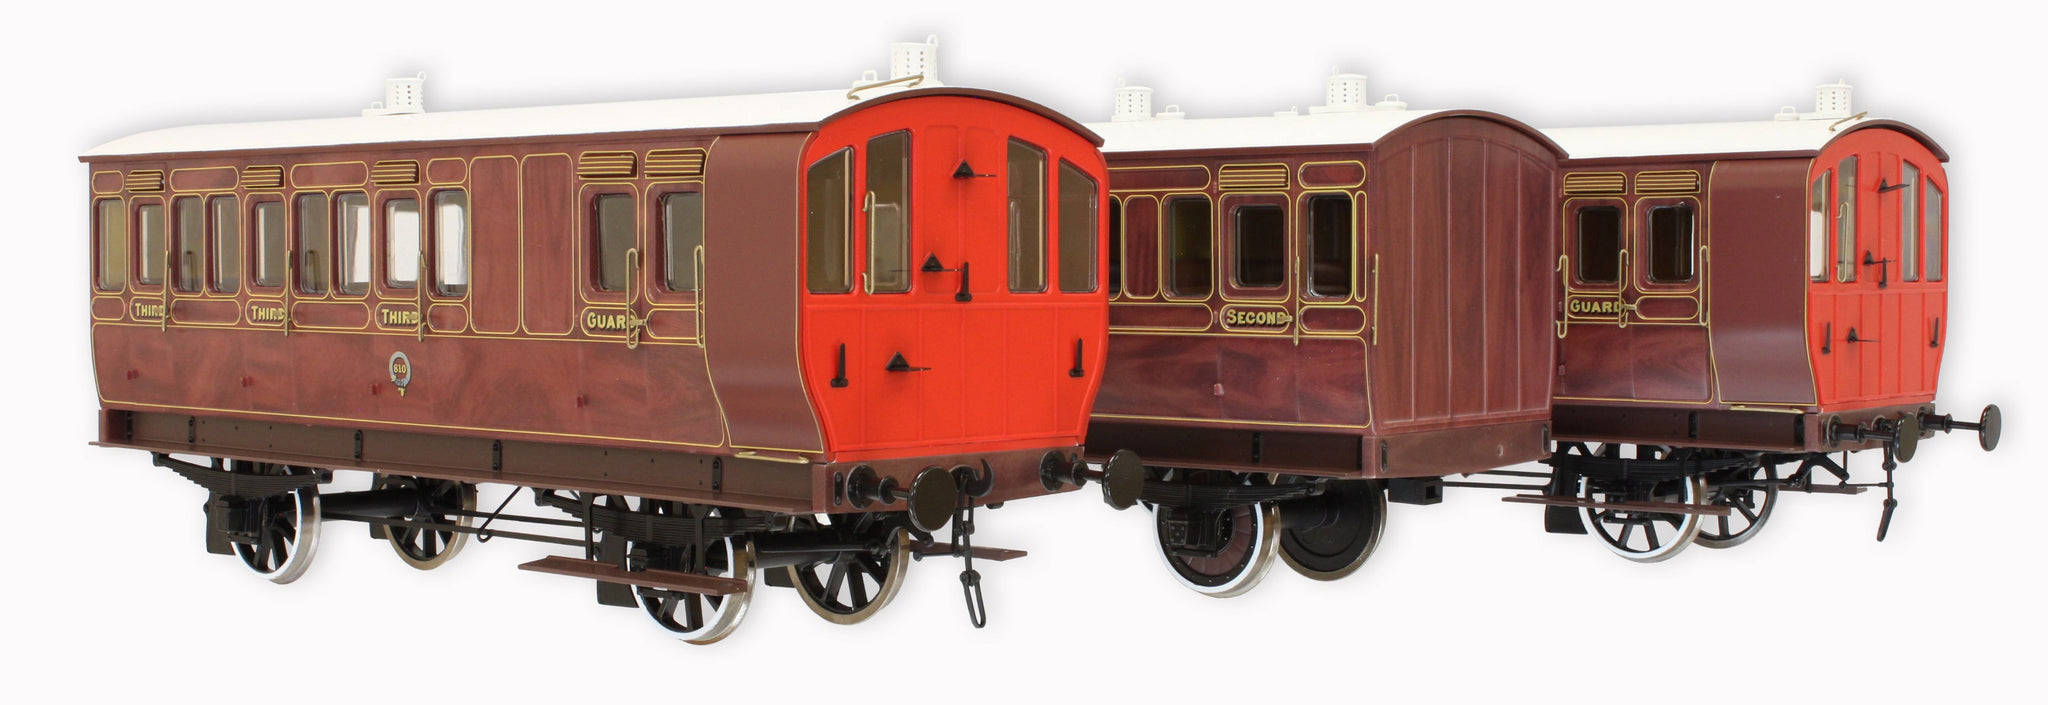 7P-020-Club 2 O Gauge Stroudley 4 Wheel Coach Trilogy Light Bar Fitted